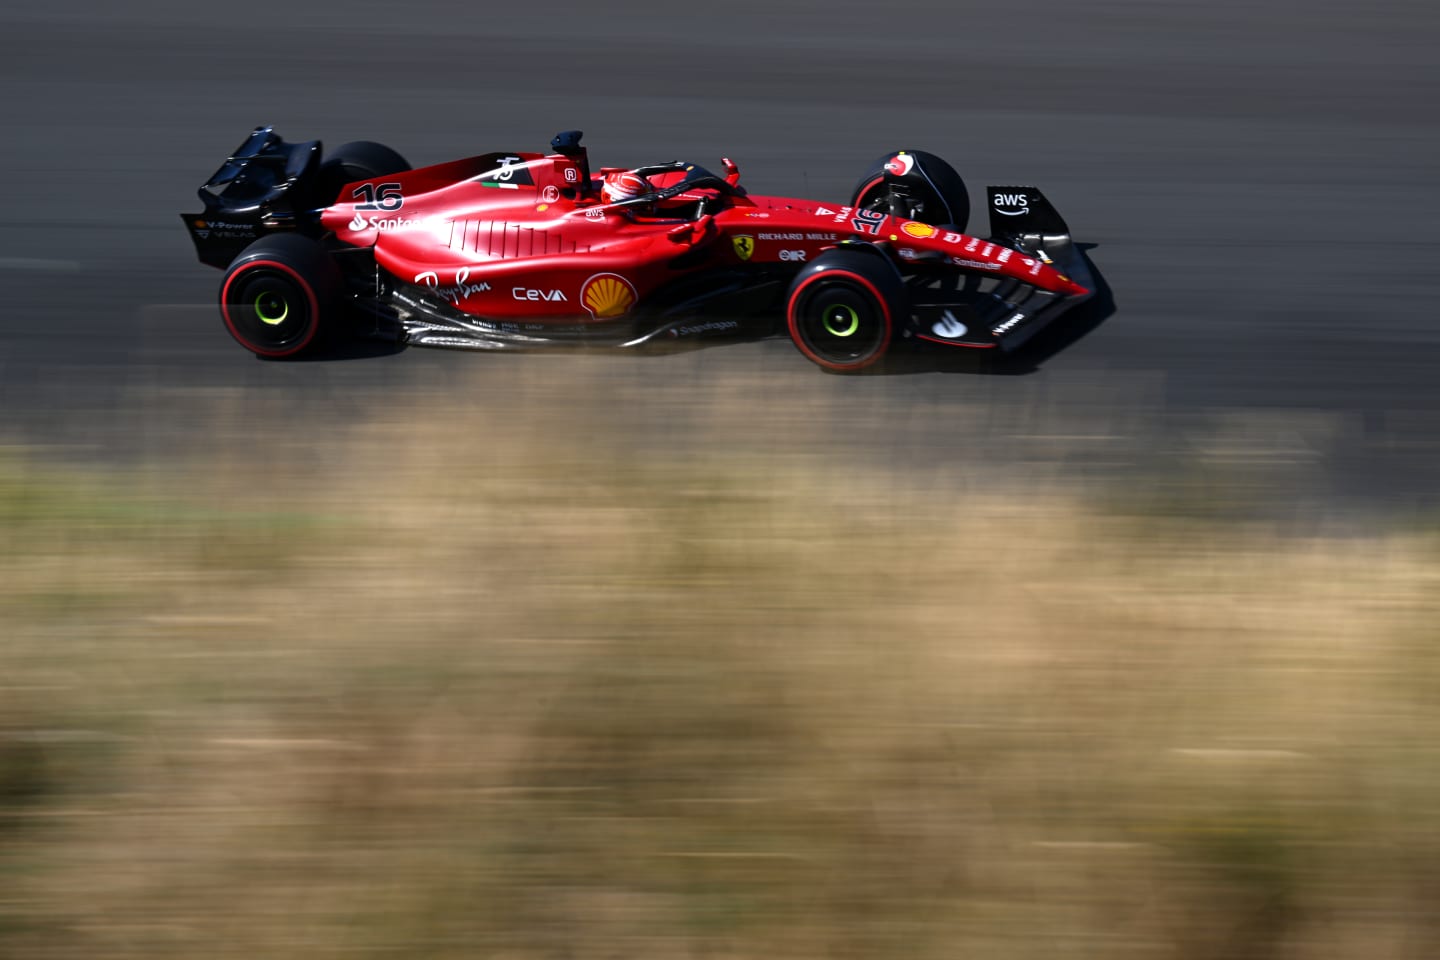 ZANDVOORT, NETHERLANDS - SEPTEMBER 03: Charles Leclerc of Monaco driving the (16) Ferrari F1-75 on track during final practice ahead of the F1 Grand Prix of The Netherlands at Circuit Zandvoort on September 03, 2022 in Zandvoort, Netherlands. (Photo by Clive Mason/Getty Images)